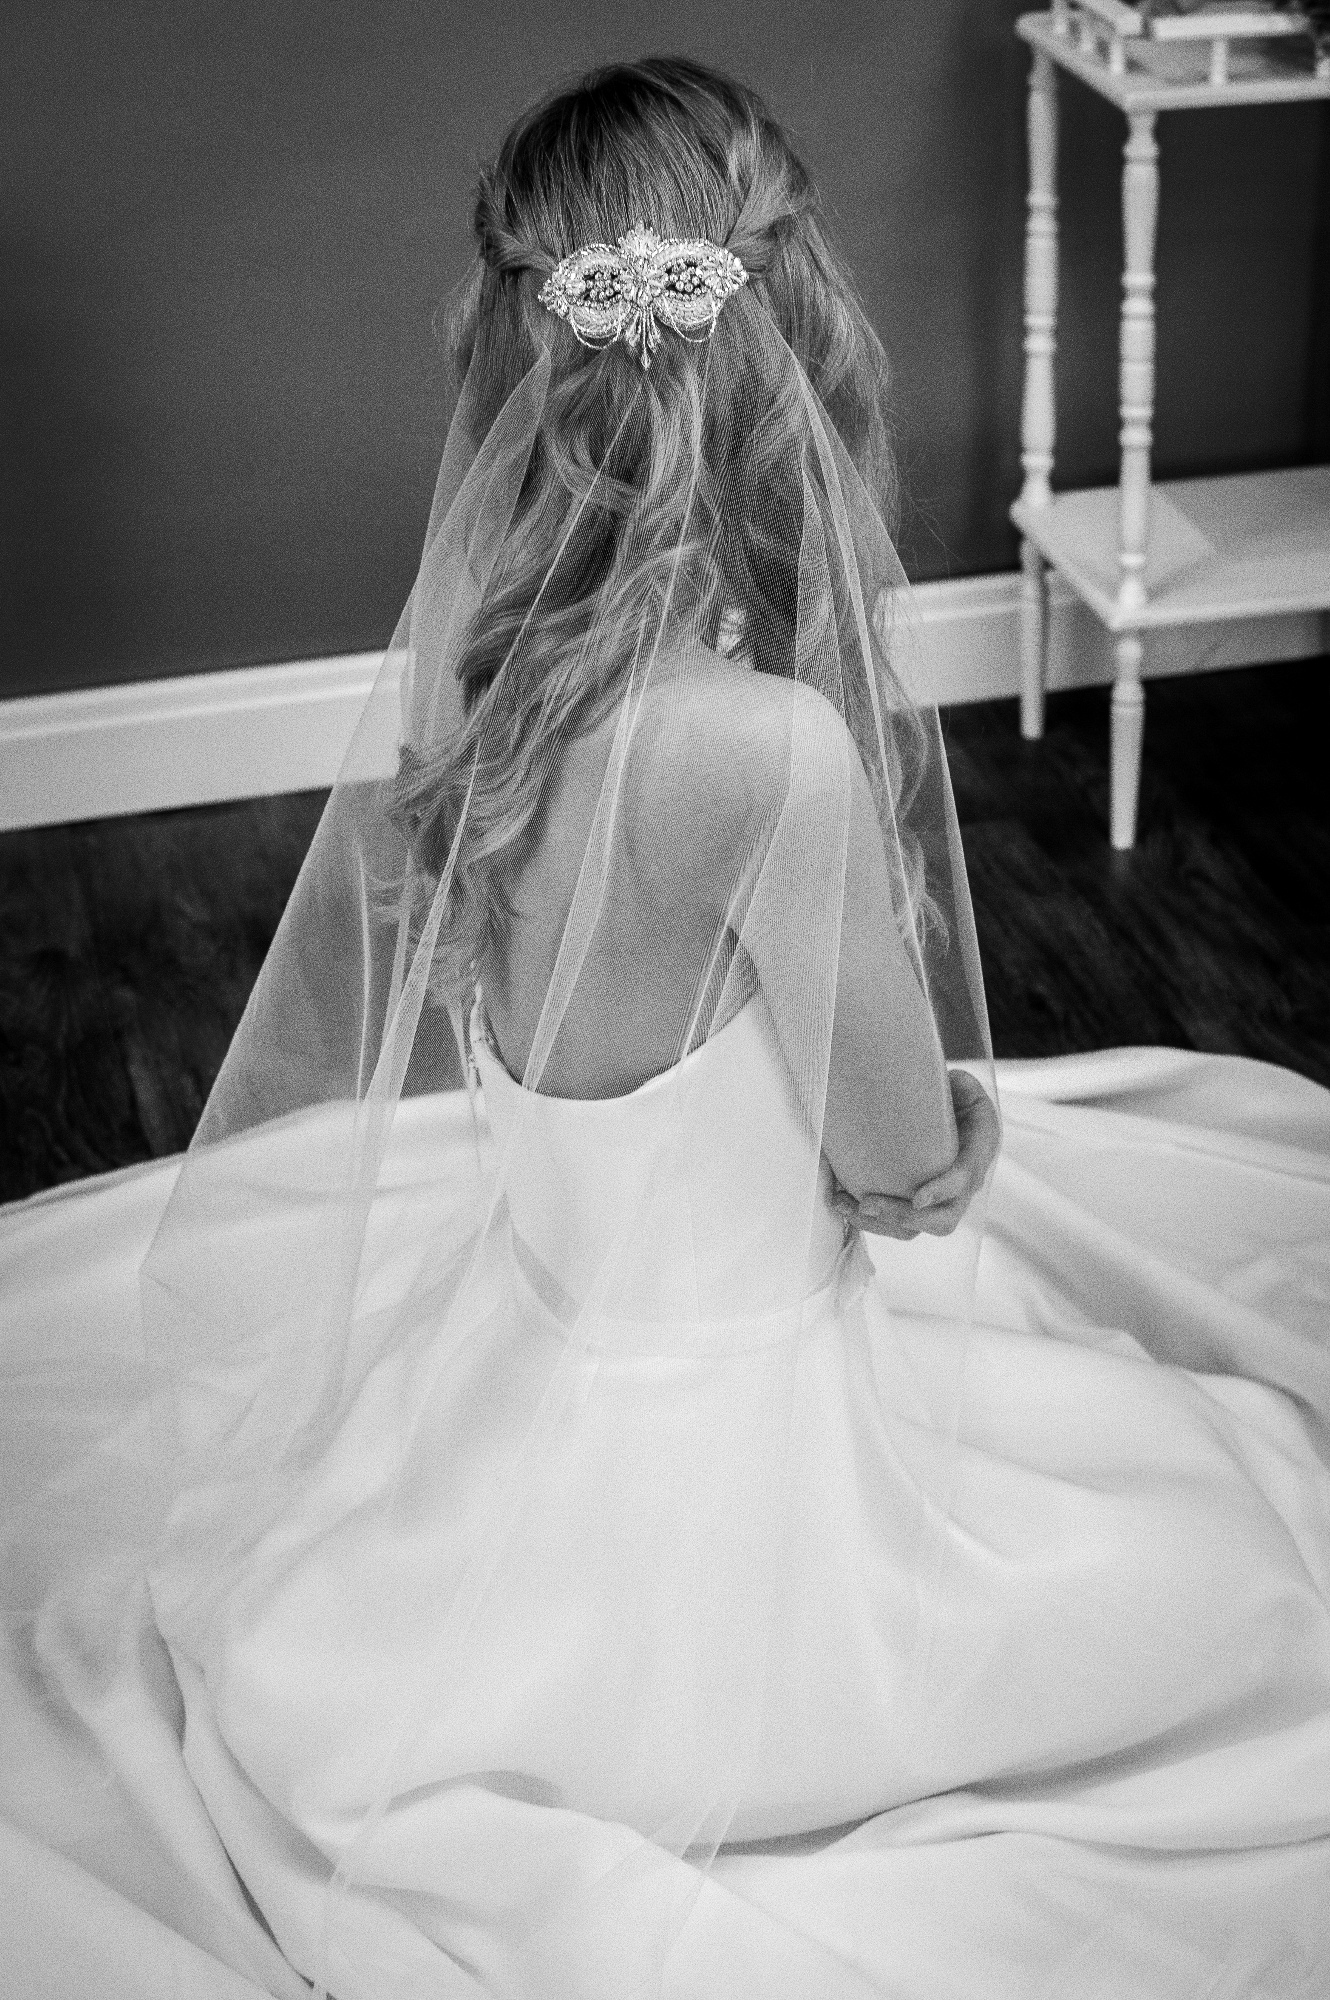 Gloria one layer chapel length barely there veil with a crystal beaded veil topper bride sitting down bw - The Wedding Veil Shop: Wedding Veil Lengths + Styles for Every Bride